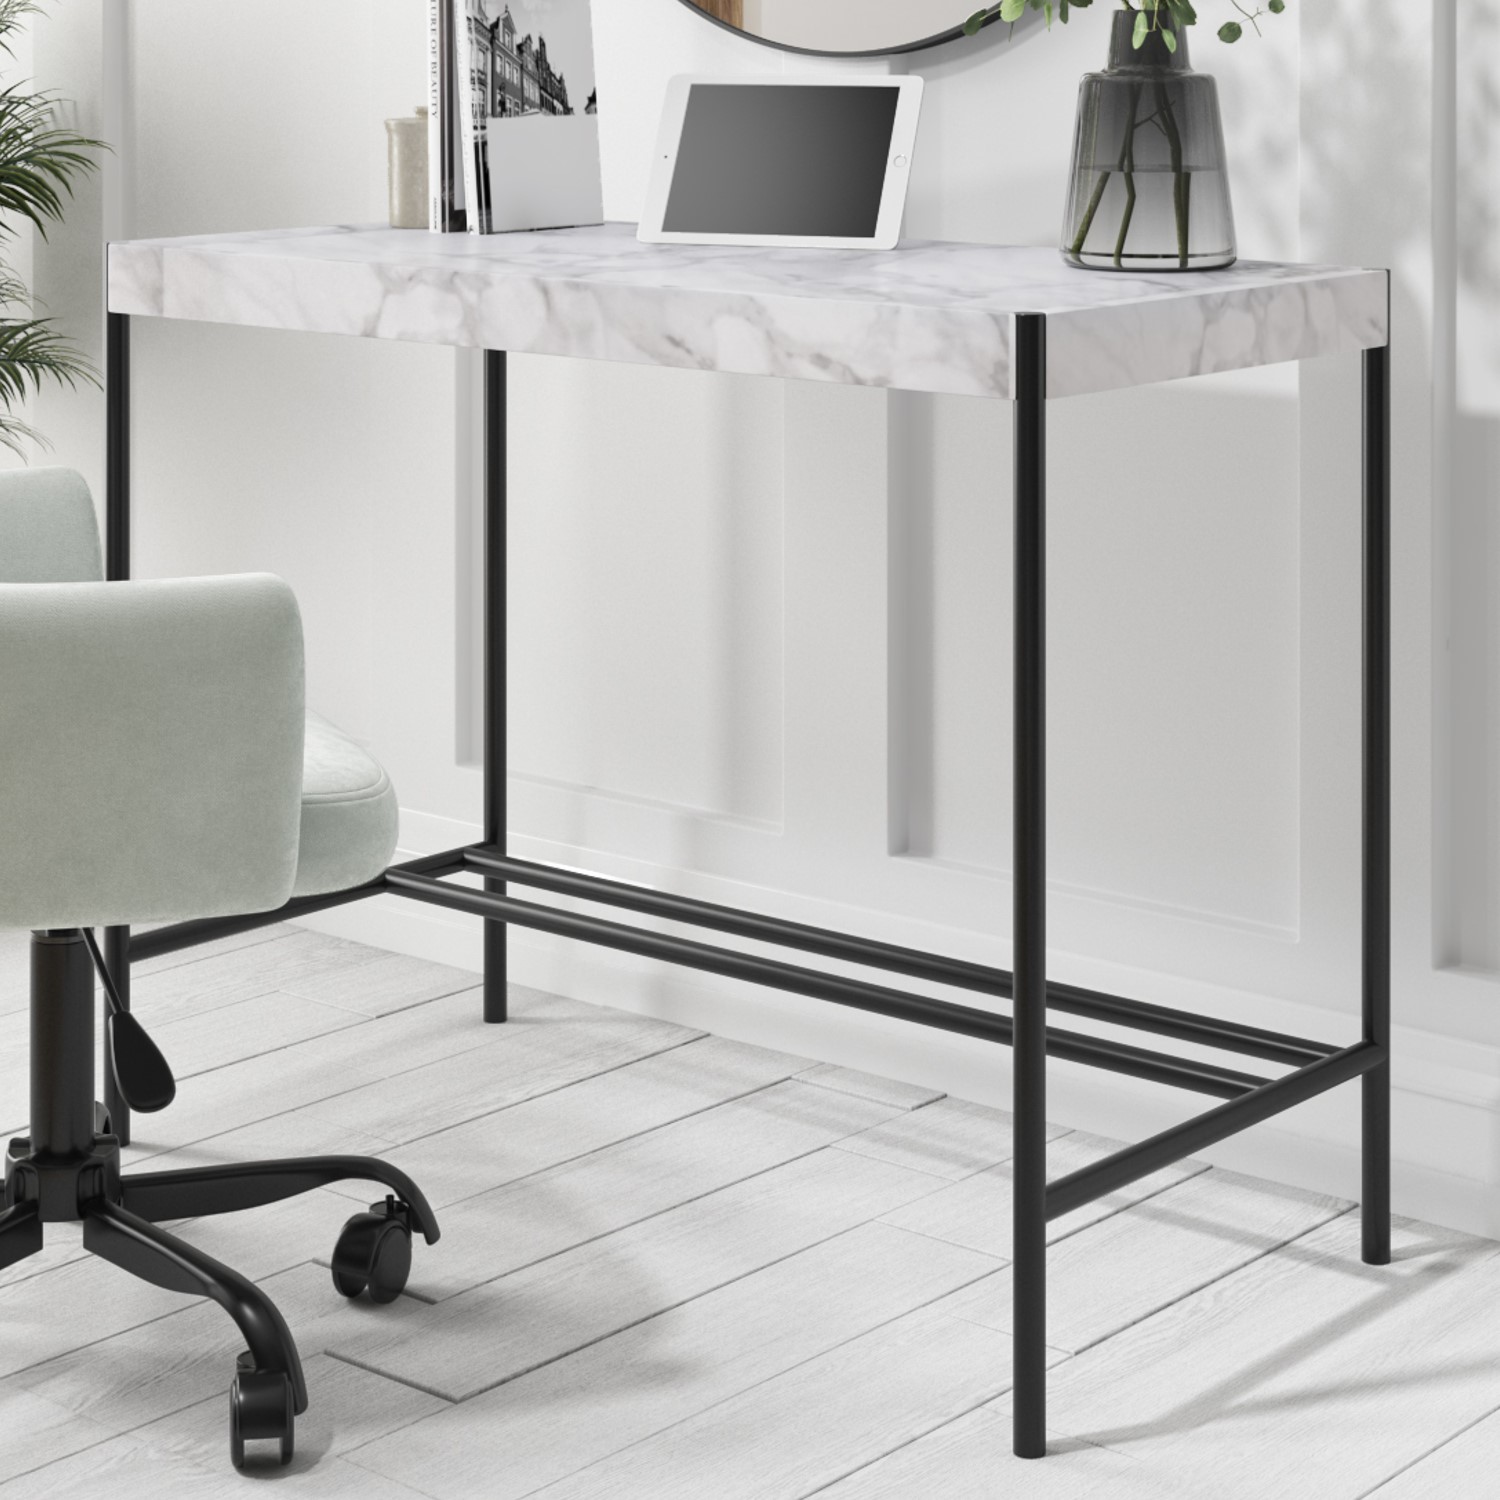 Read more about White marble & green velvet office desk and chair set roxy